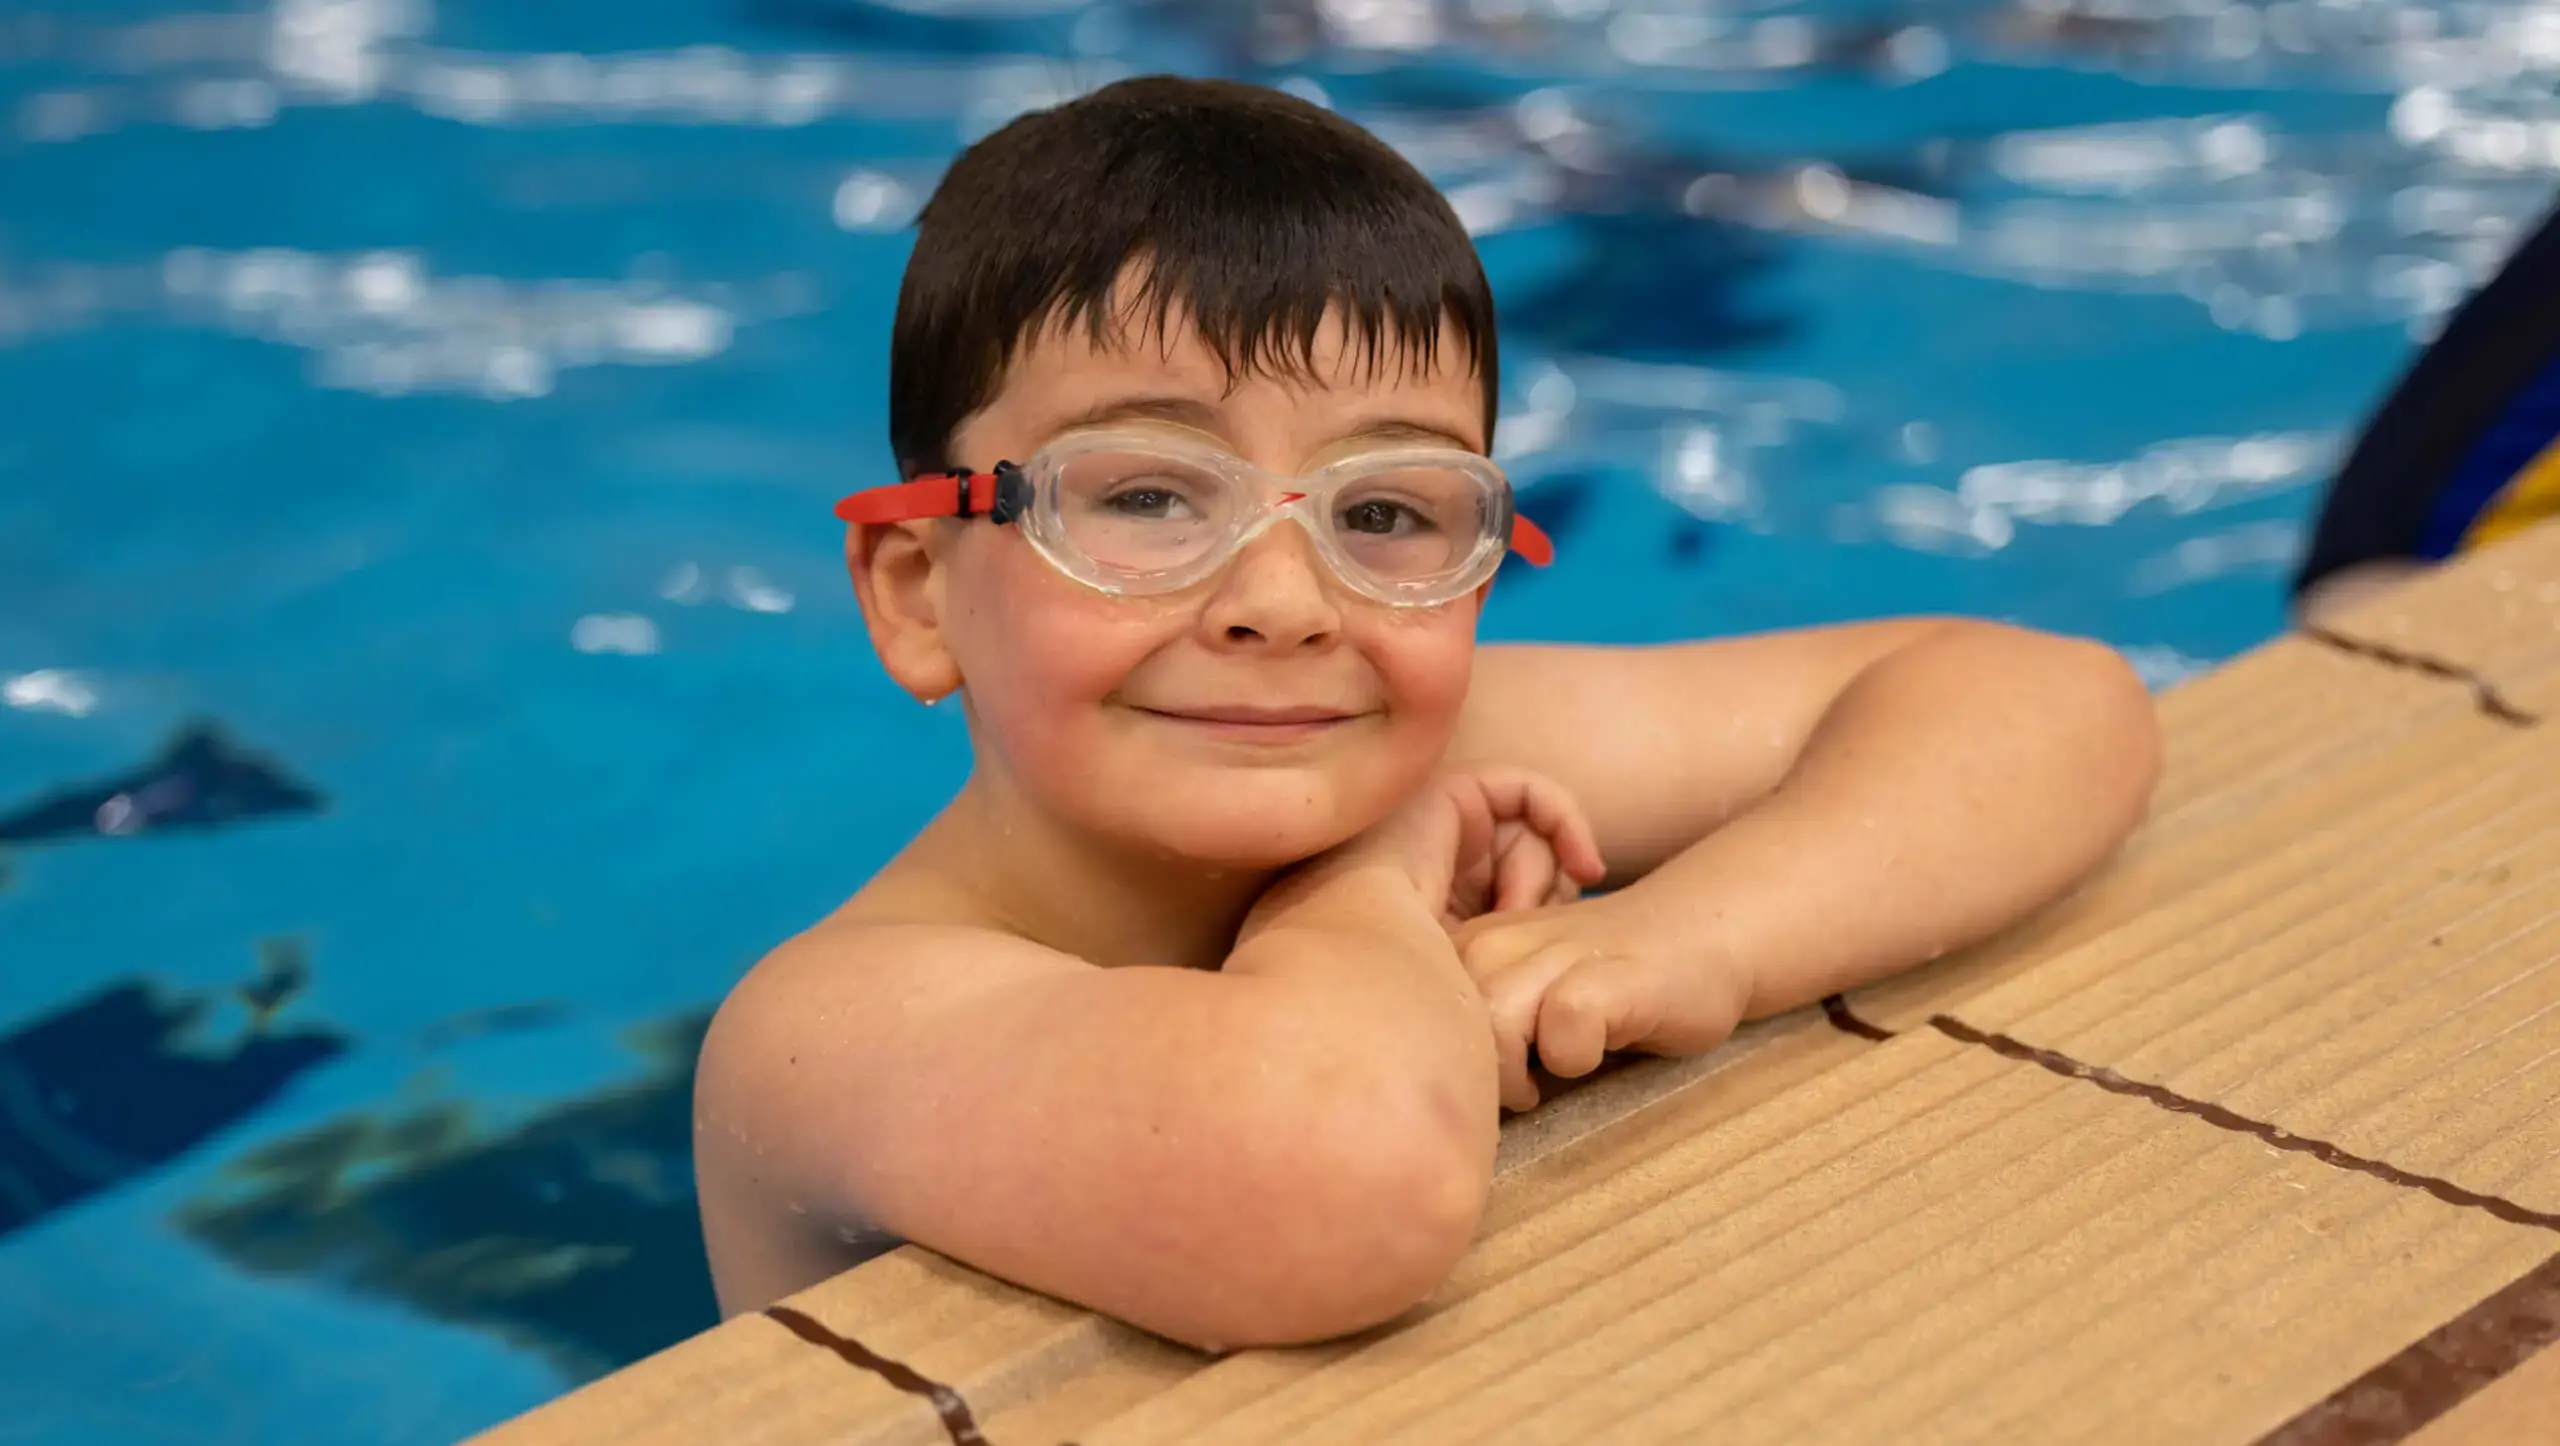 Chapter House pupil at a swimming lesson.